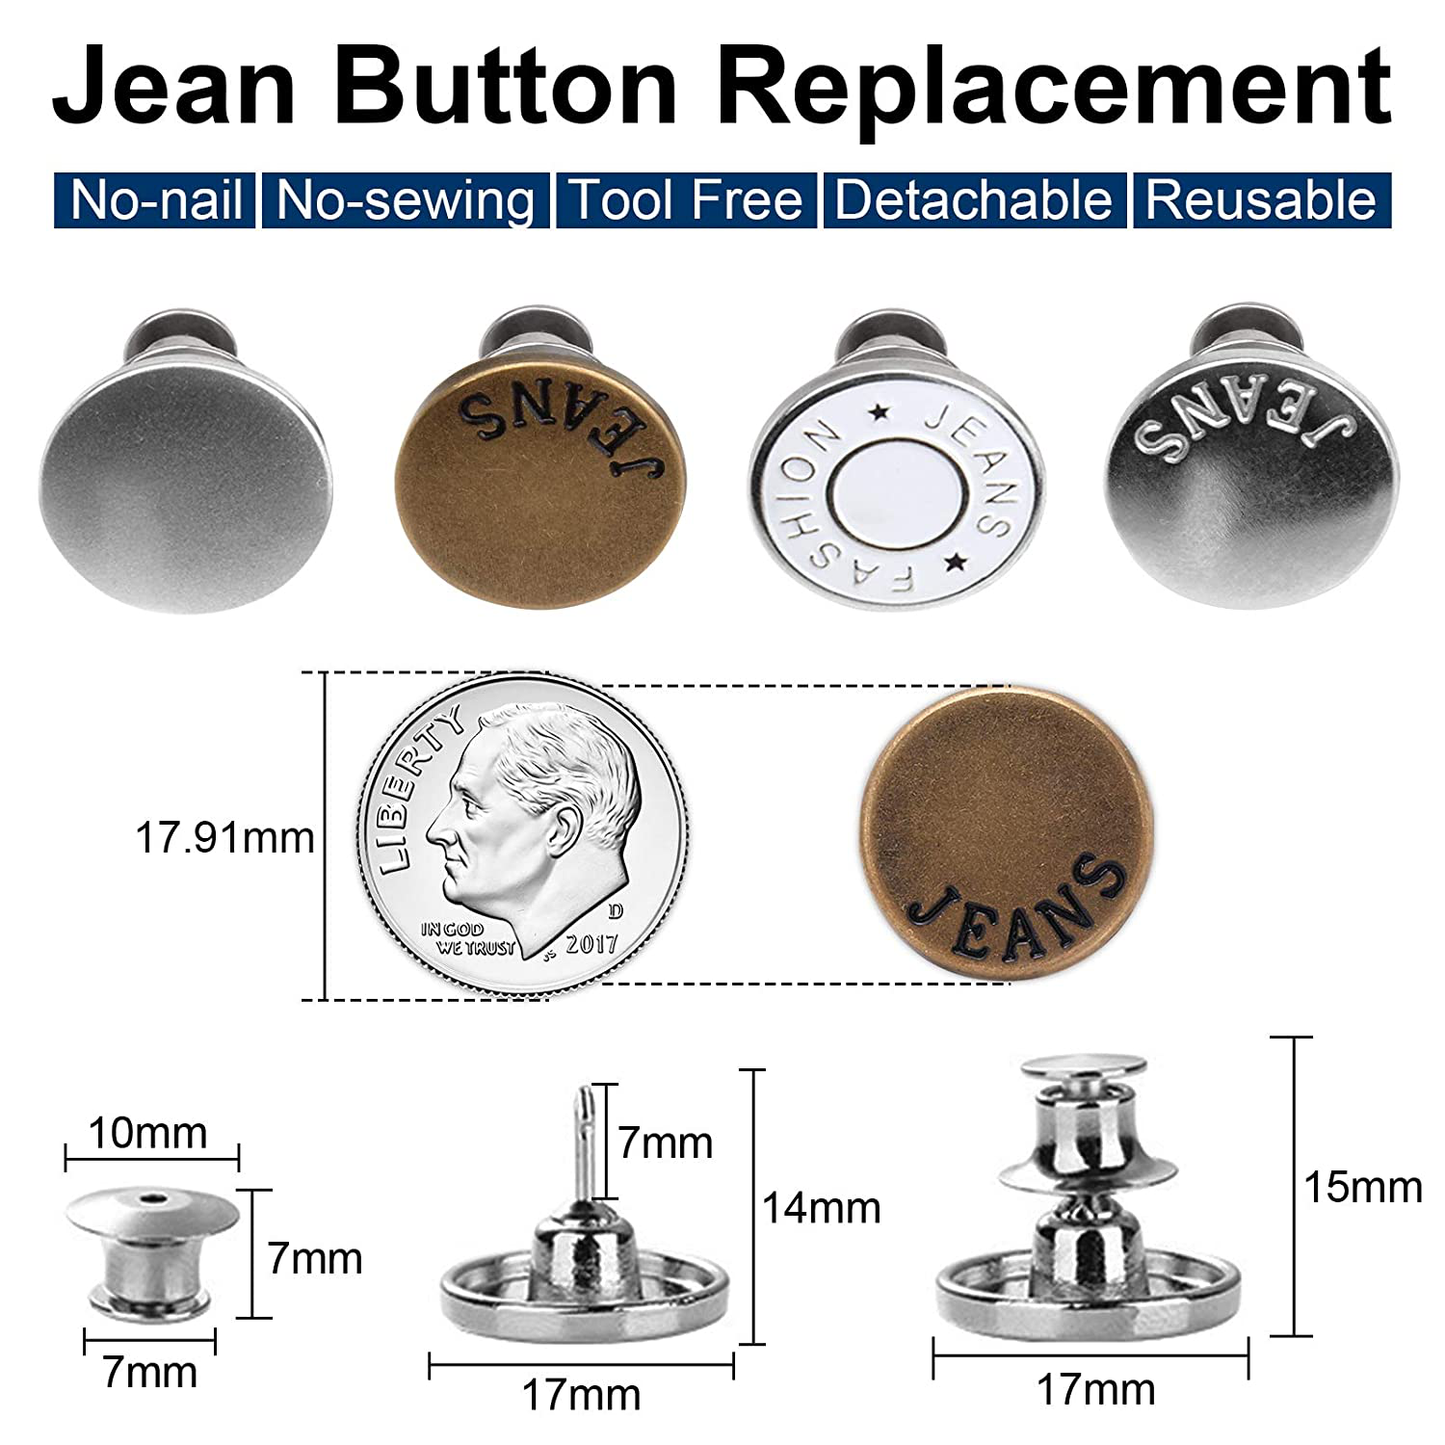 [Upgraded] 8 Sets Button Pins for Jeans, TOOVREN Perfect Fit Jean Button Replacement, 4 Styles Adjustable Jean Button Pins Metal Clips Snap Tack, No Sew Instant Extend or Reduce Any Pants Waist